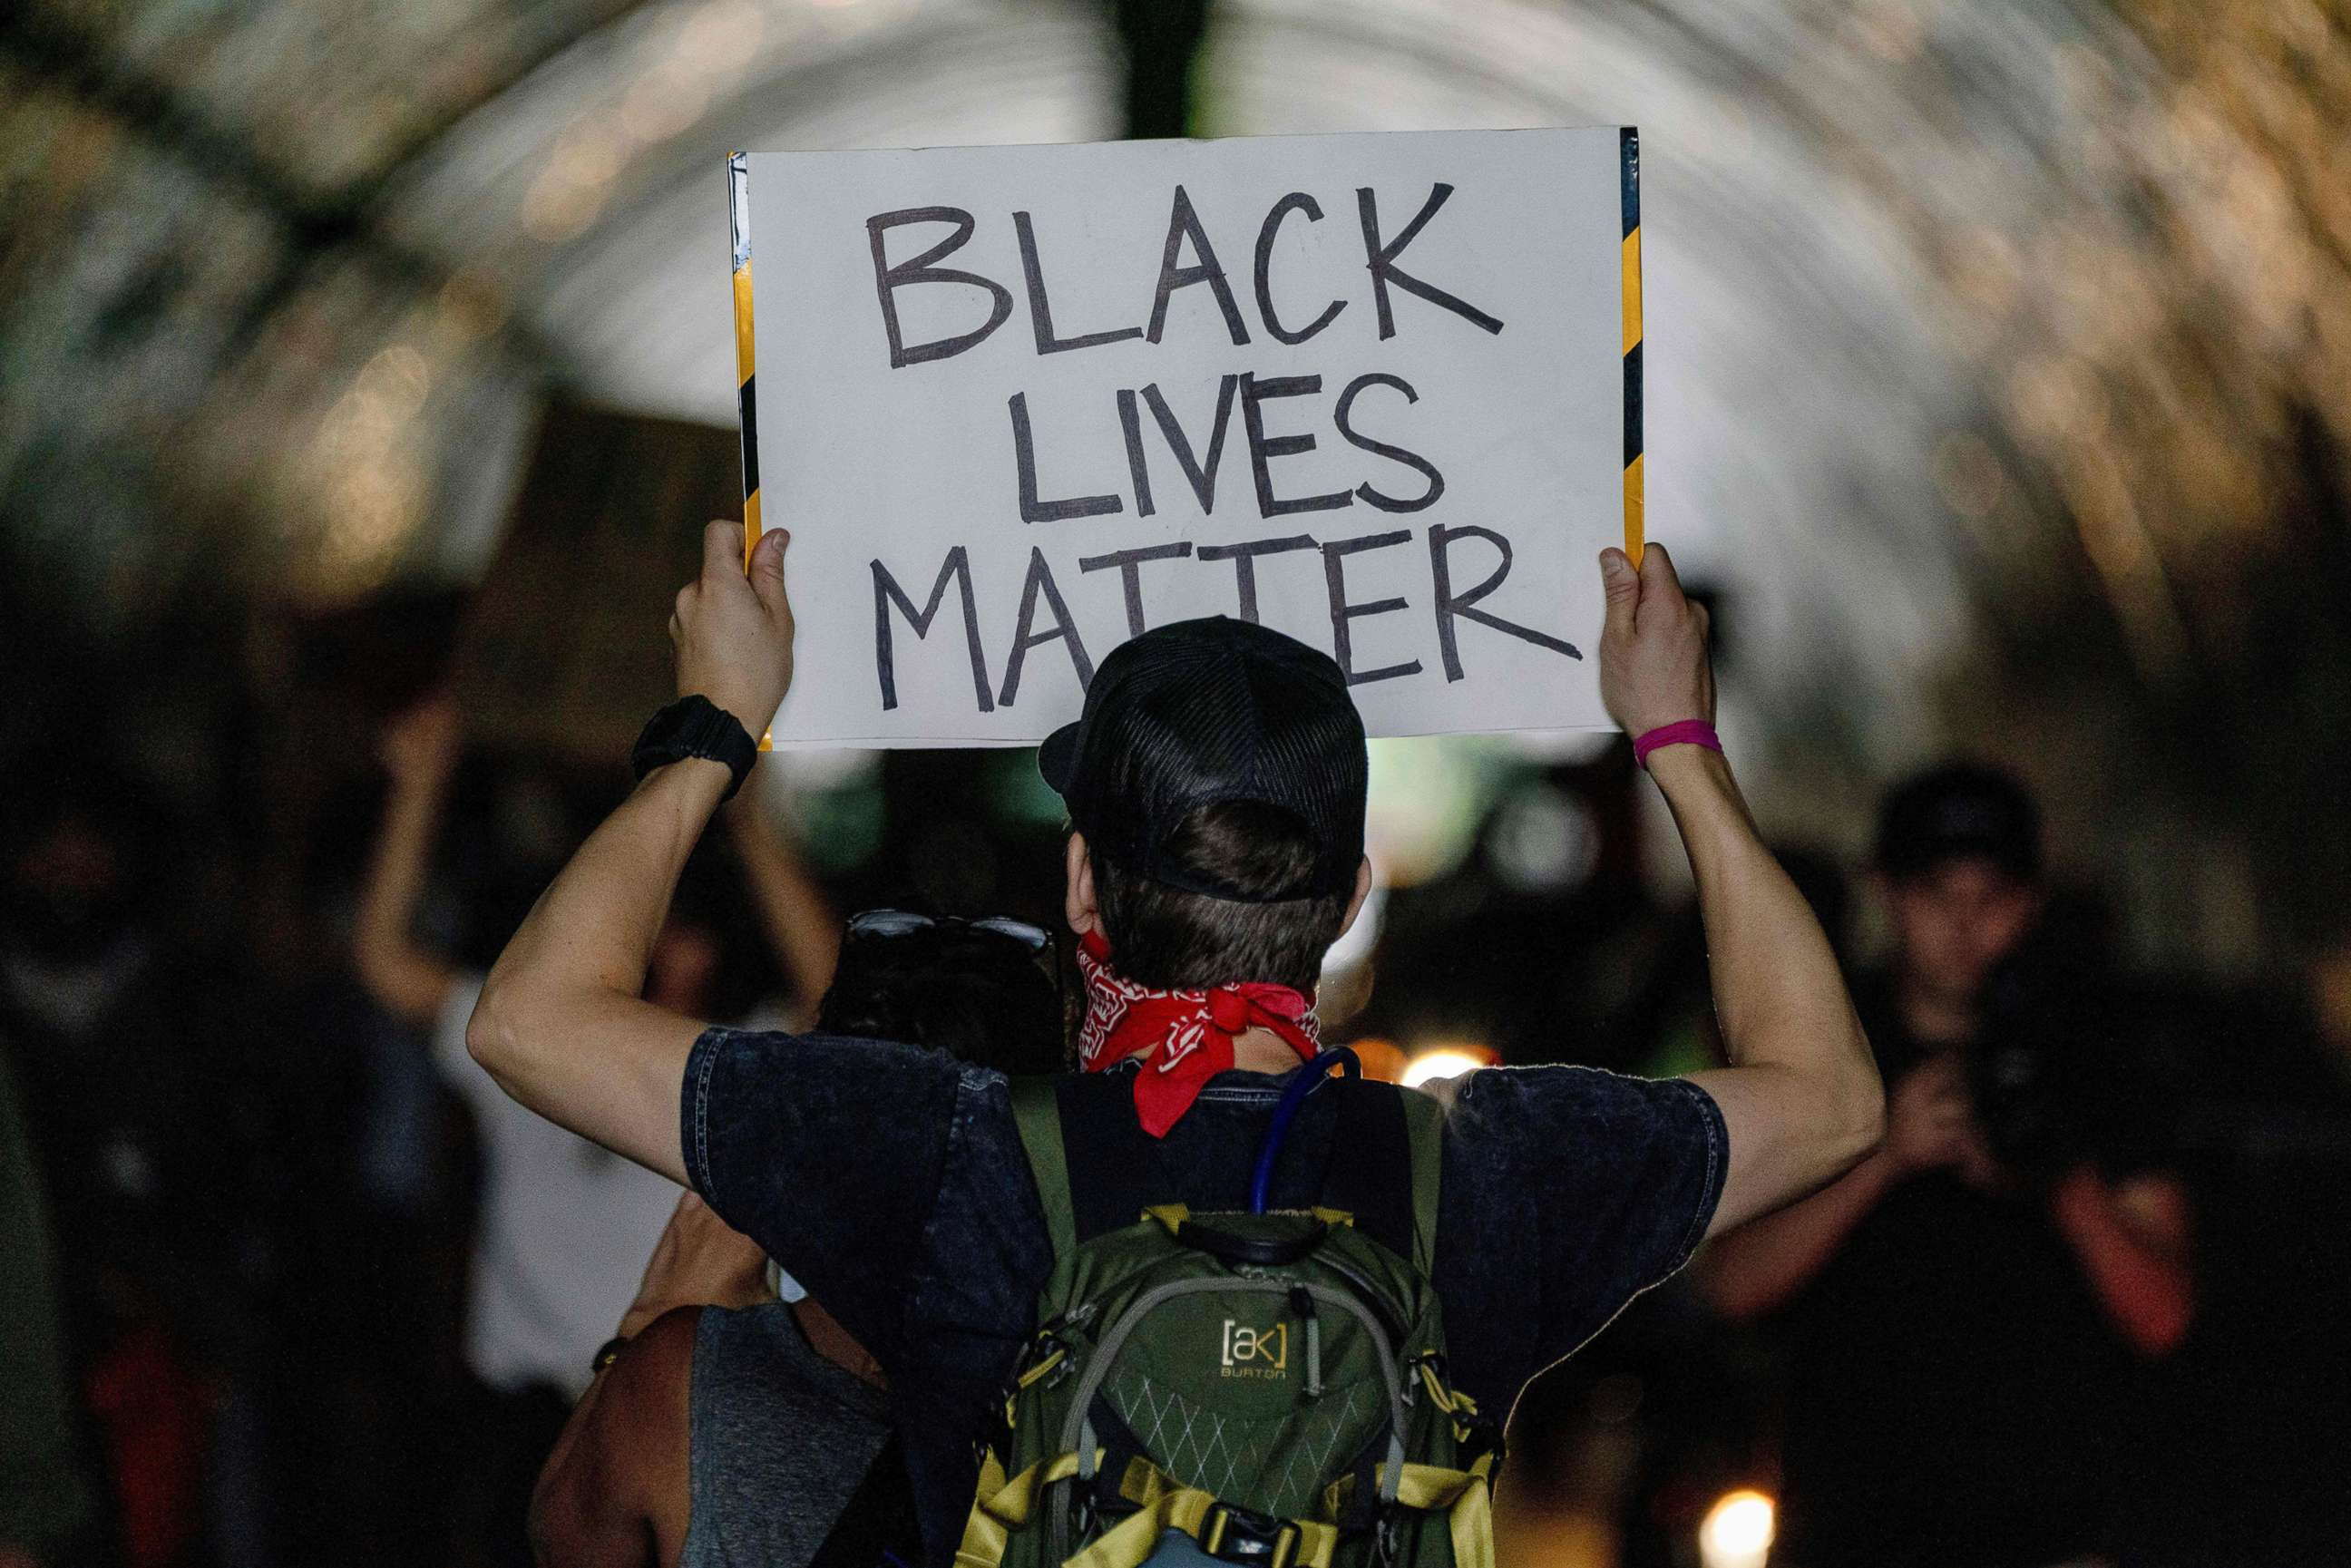 PHOTO: A protester holds up a placard as they march during a demonstration over the death of George Floyd, in Los Angeles.